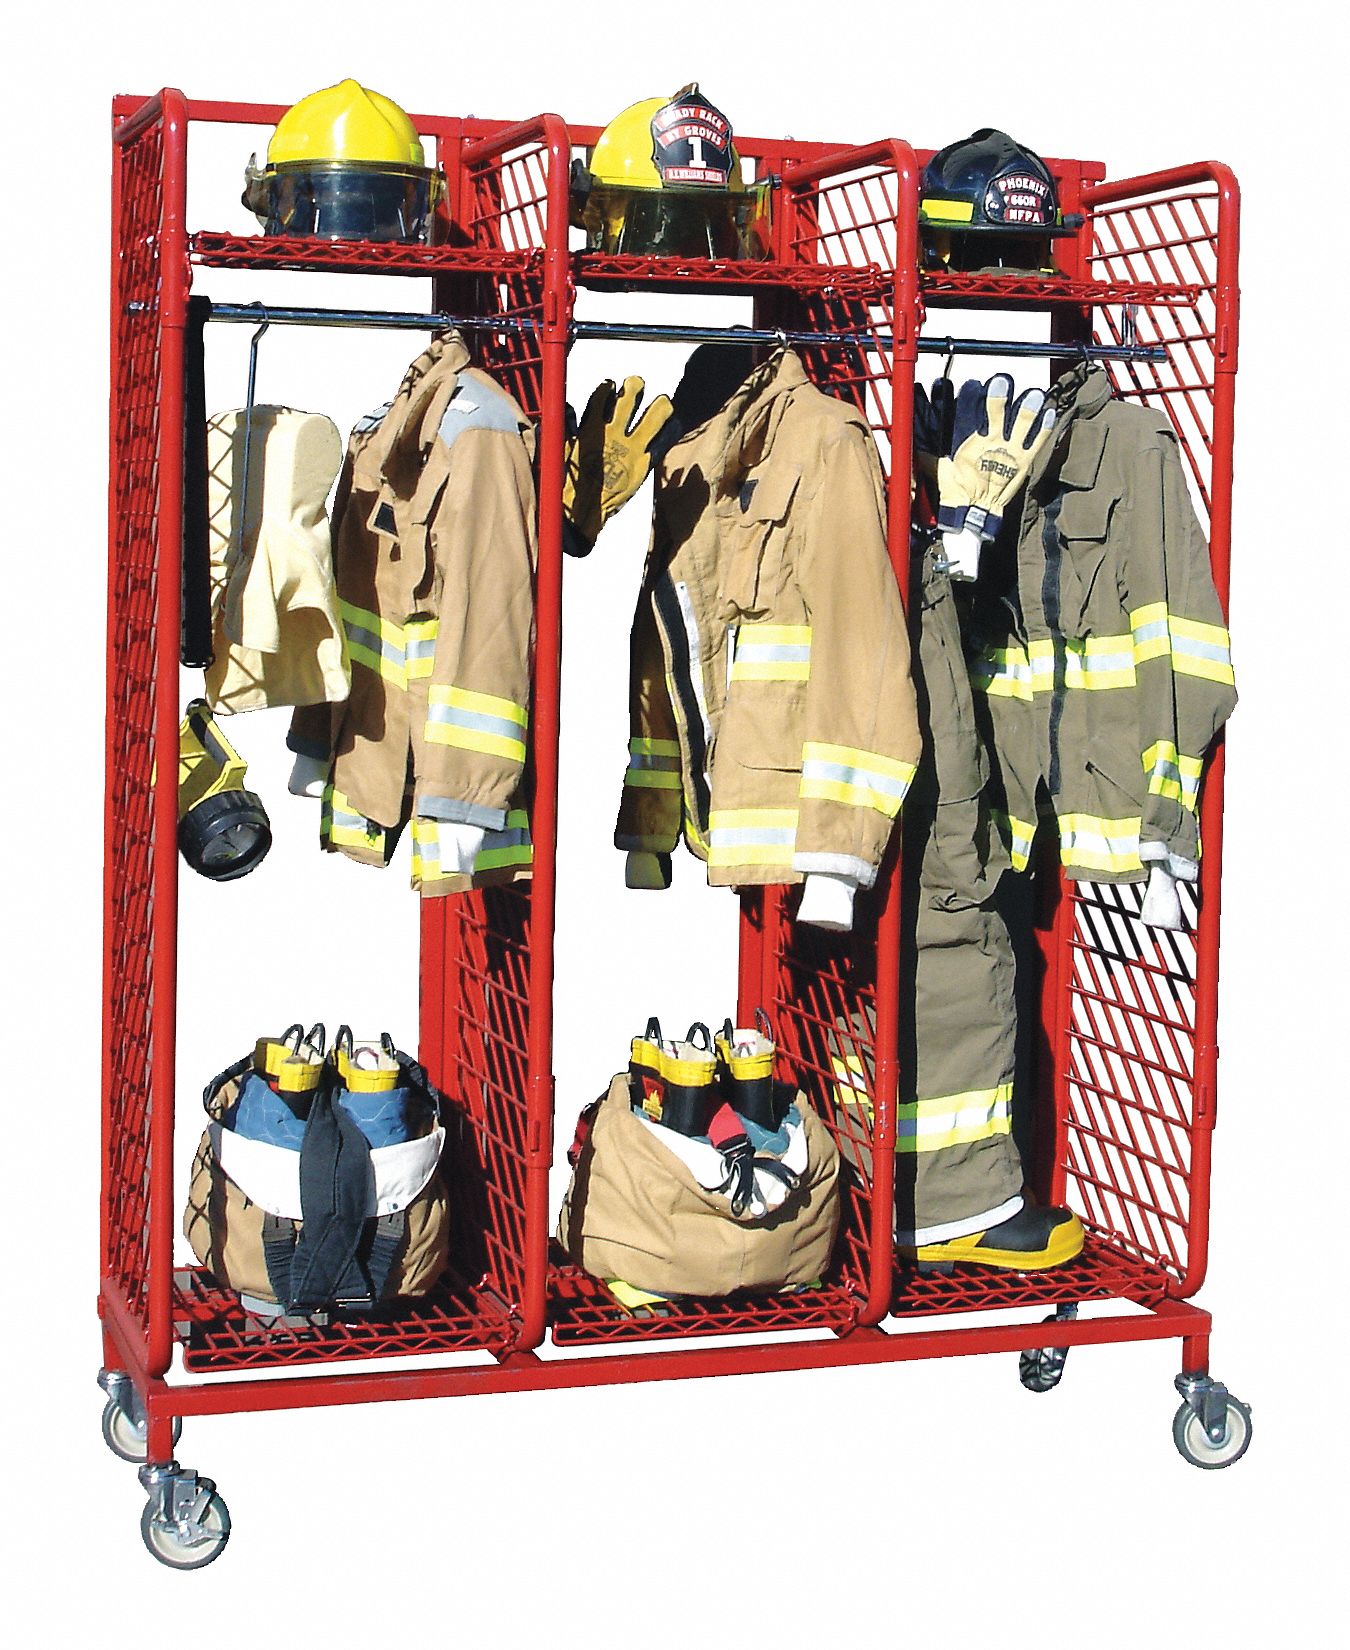 GROVES Turnout Gear Storage Rack: Mobile, 1 Sides, 3 Compartments, Red  Powder-Coat